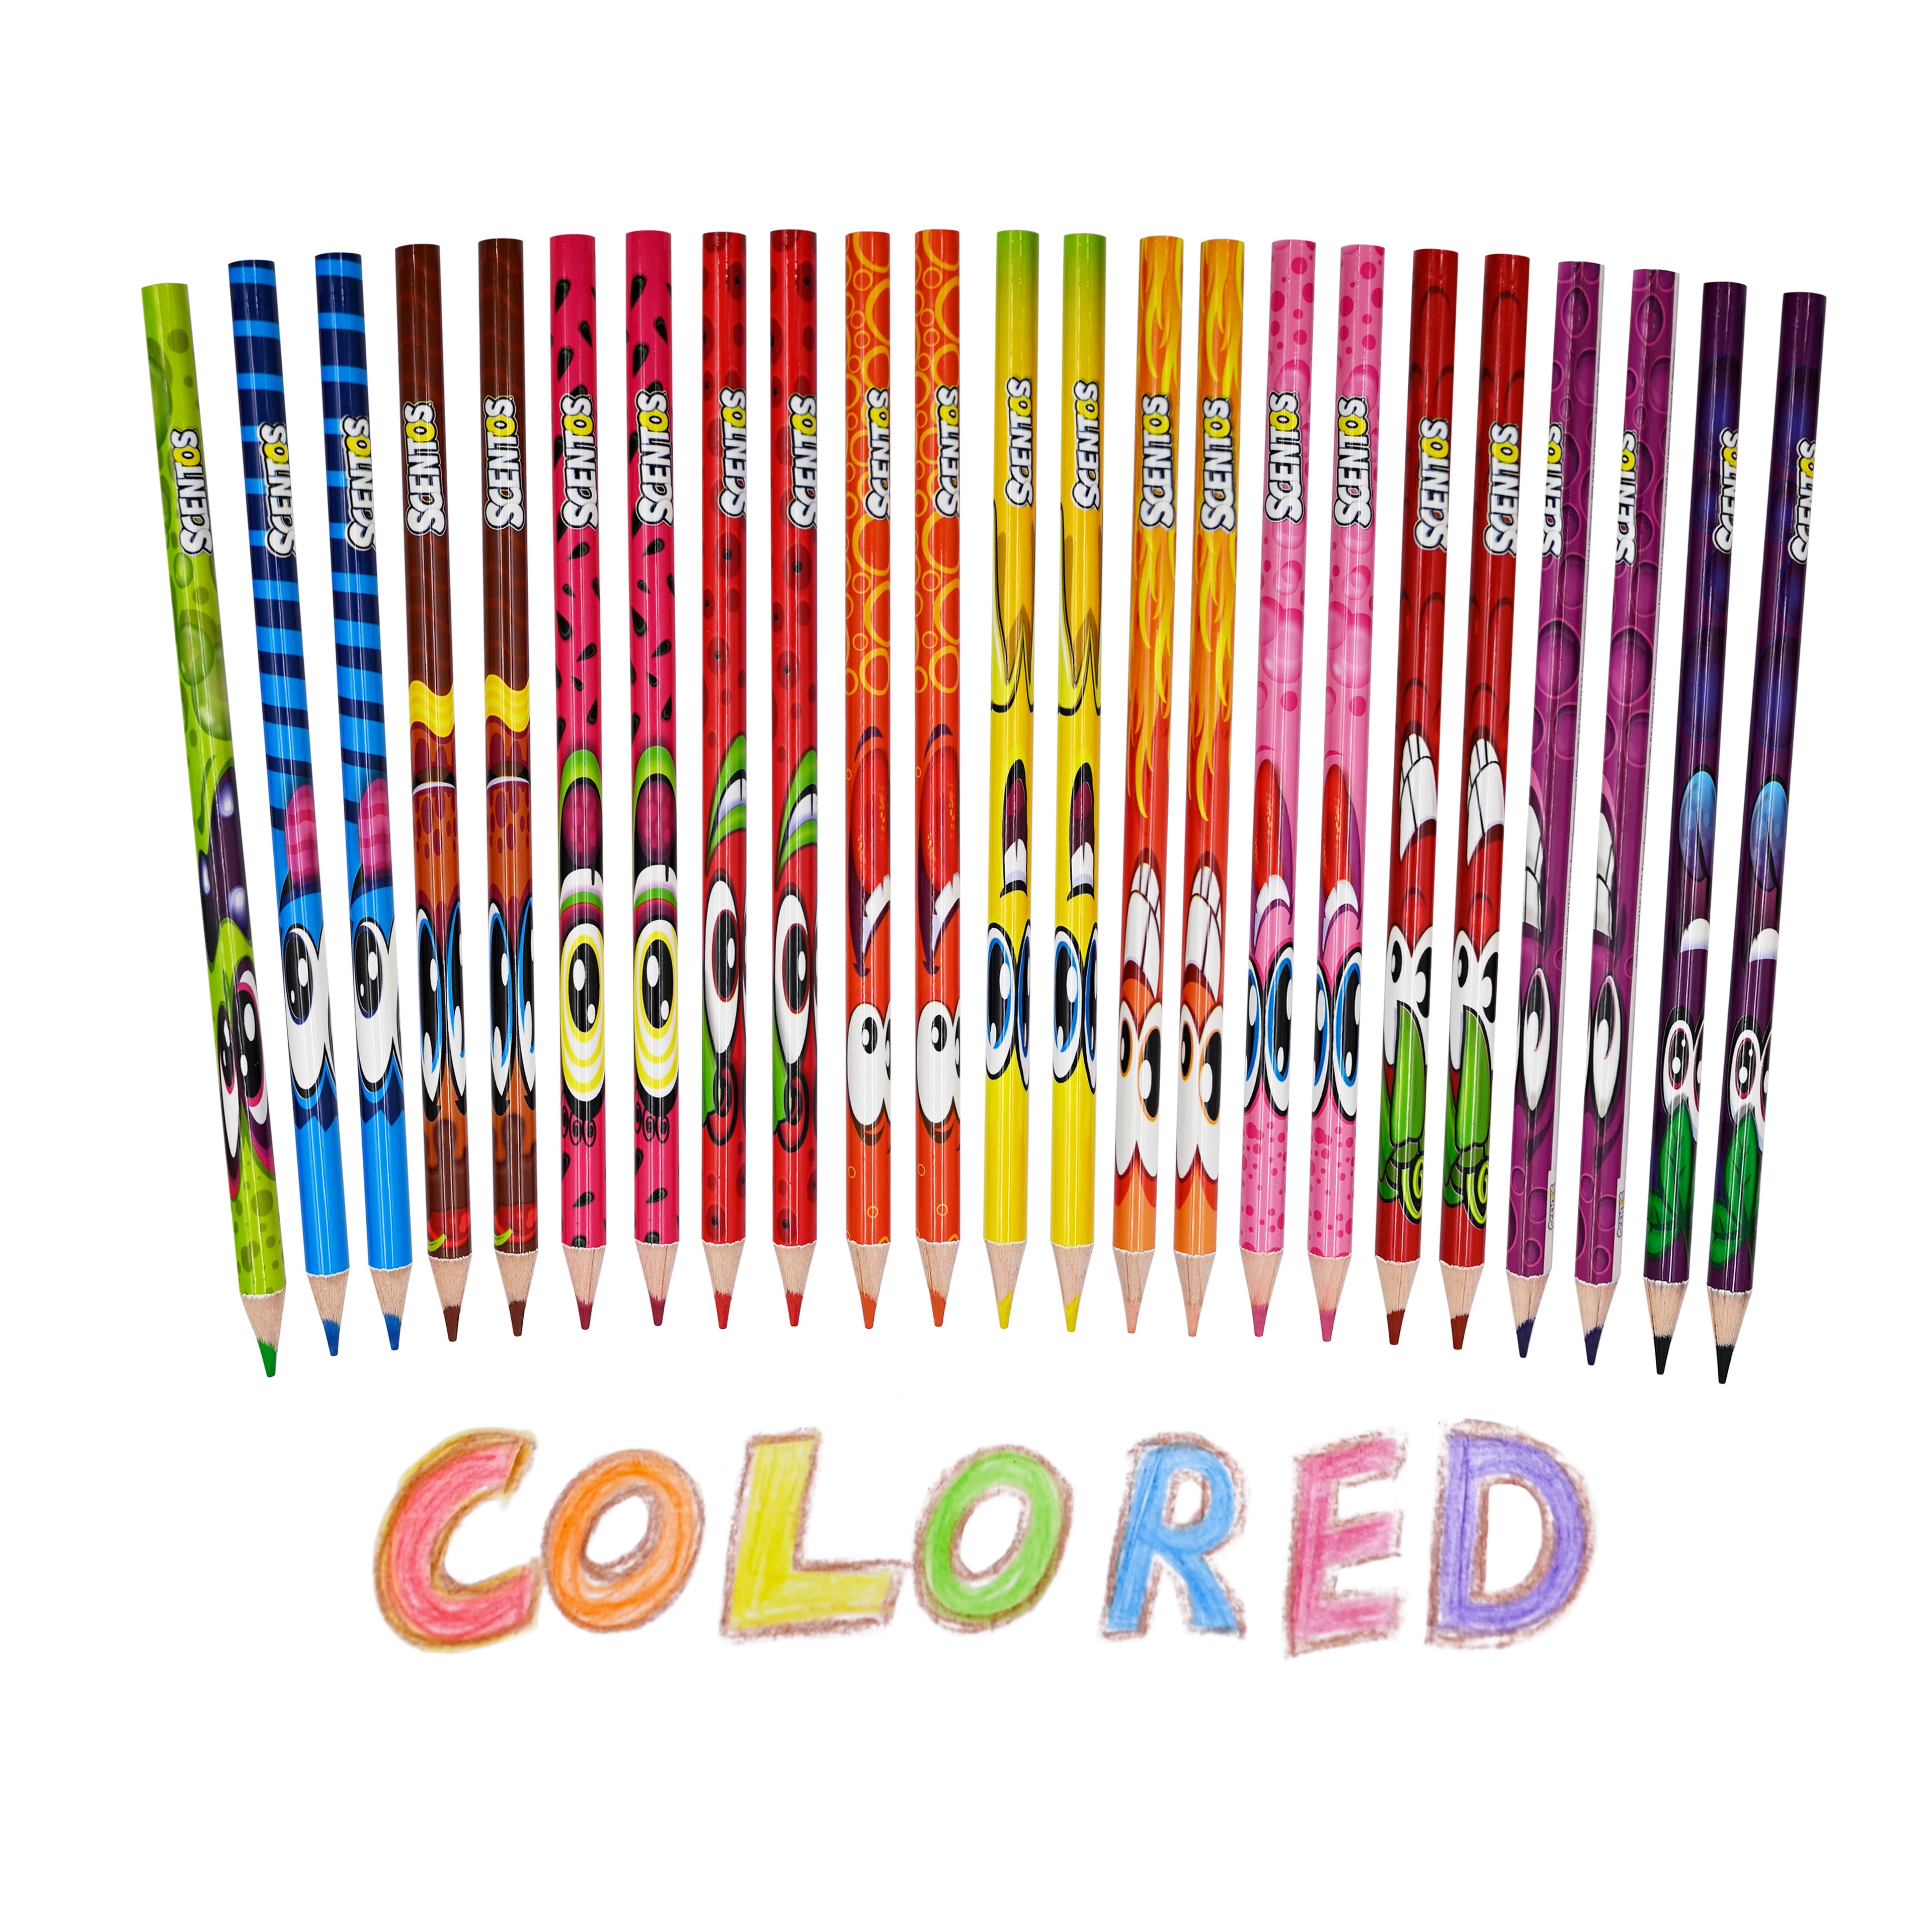 Scentos Scented Colored Pencils for Kids - Scratch N' Sniff - Color Pencil  Set - For Ages 3 and Up - 12 Pack